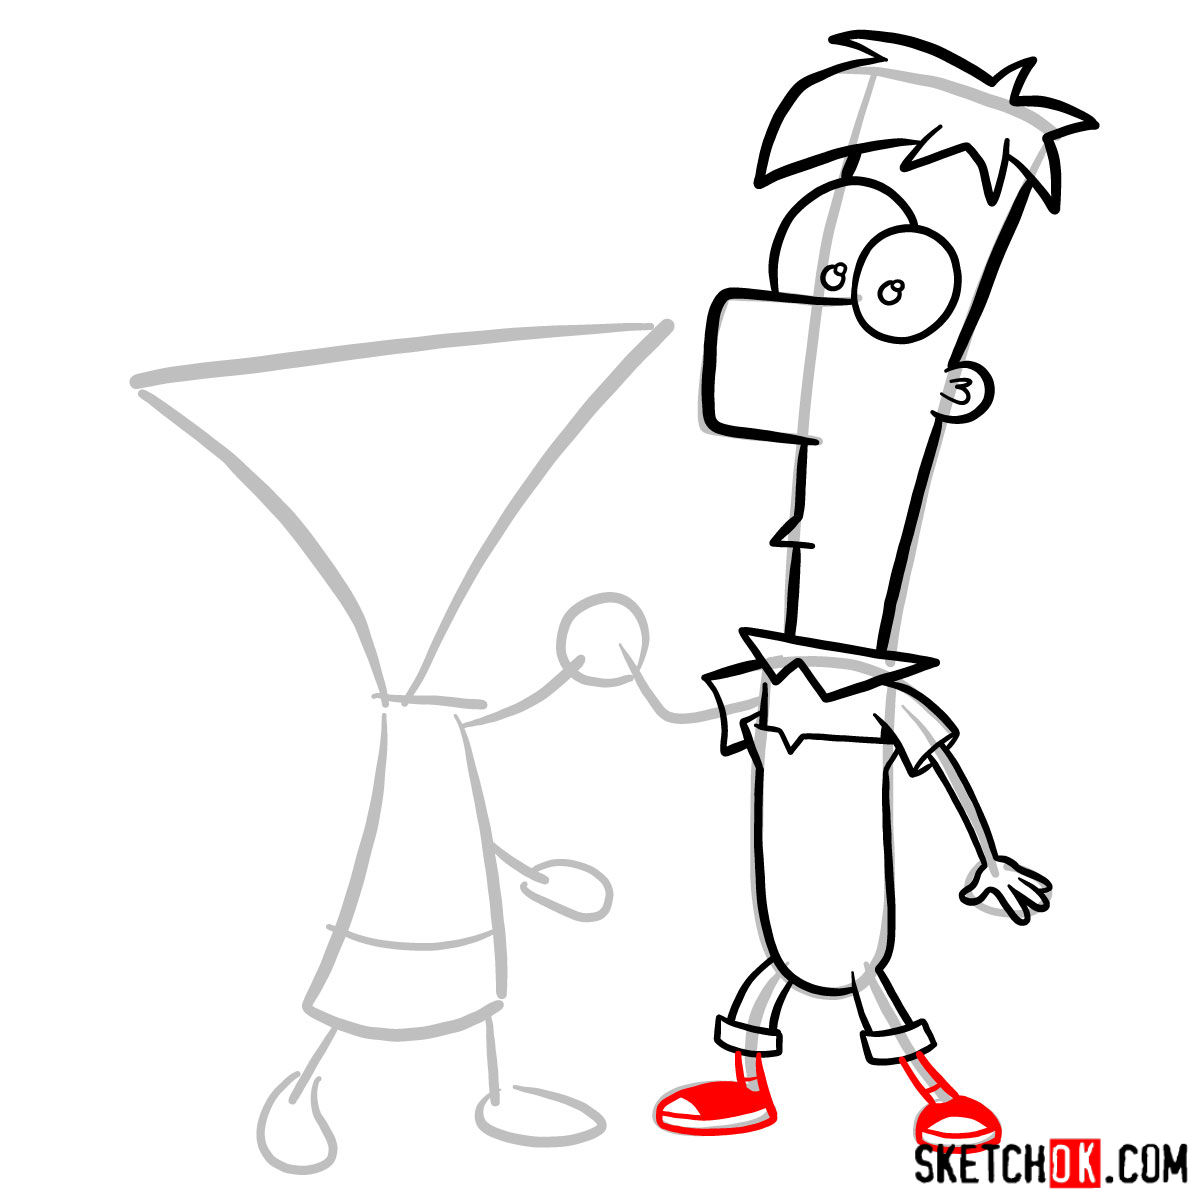 How to draw Phineas and Ferb - step 08